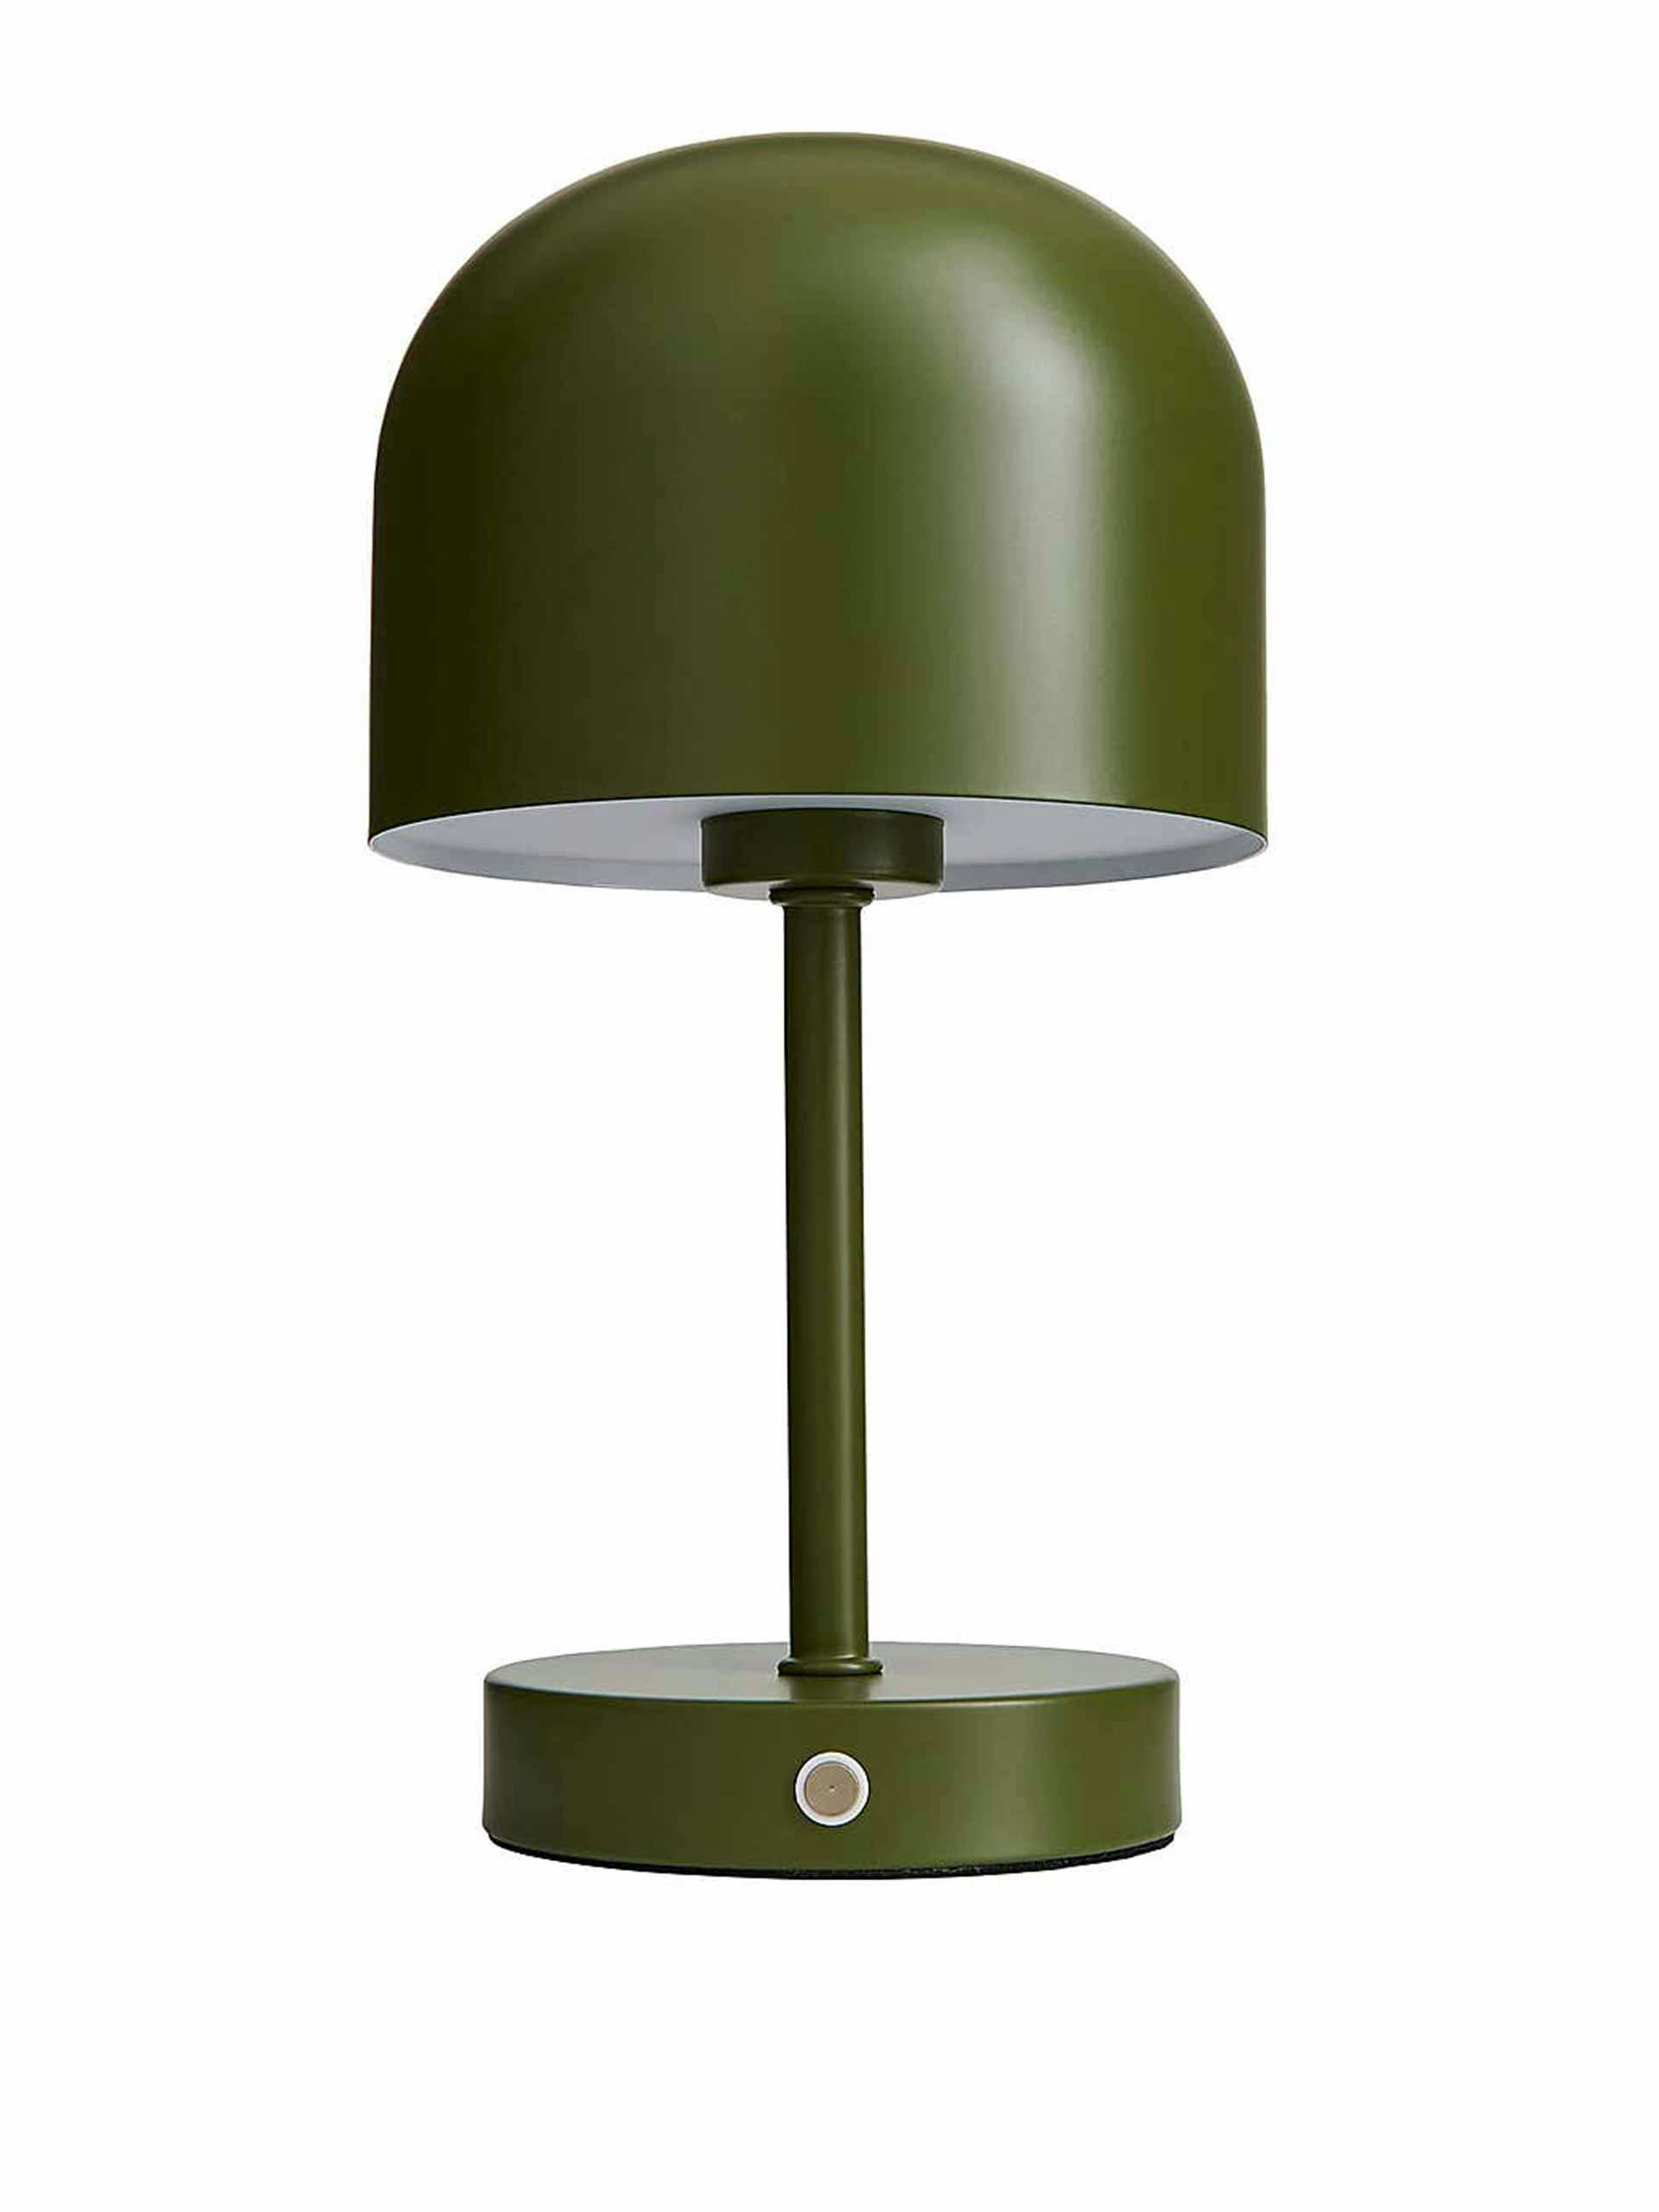 Keko rechargeable table lamp in Olive